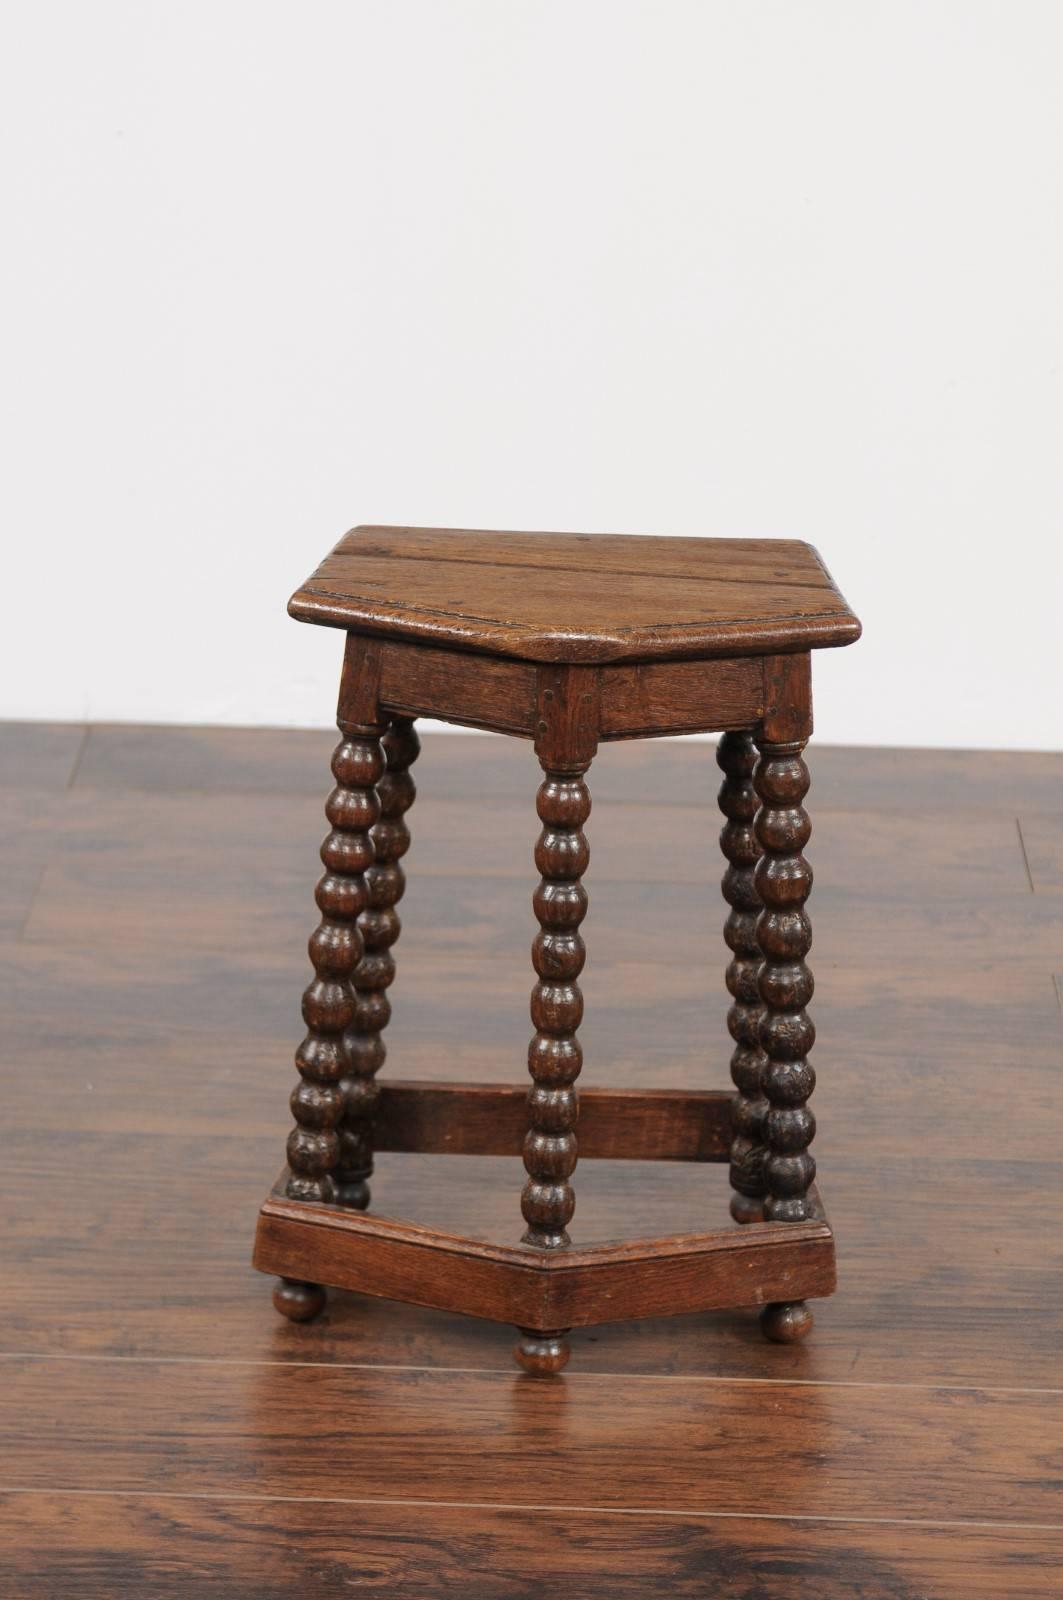 A French Louis XIII style oak bobbin leg stool from the mid-19th century, with polygonal seat and side stretcher. This French oak stool features a planked polygonal-shaped seat, raised on five exquisite bobbin legs, typical of the Louis XIII style.